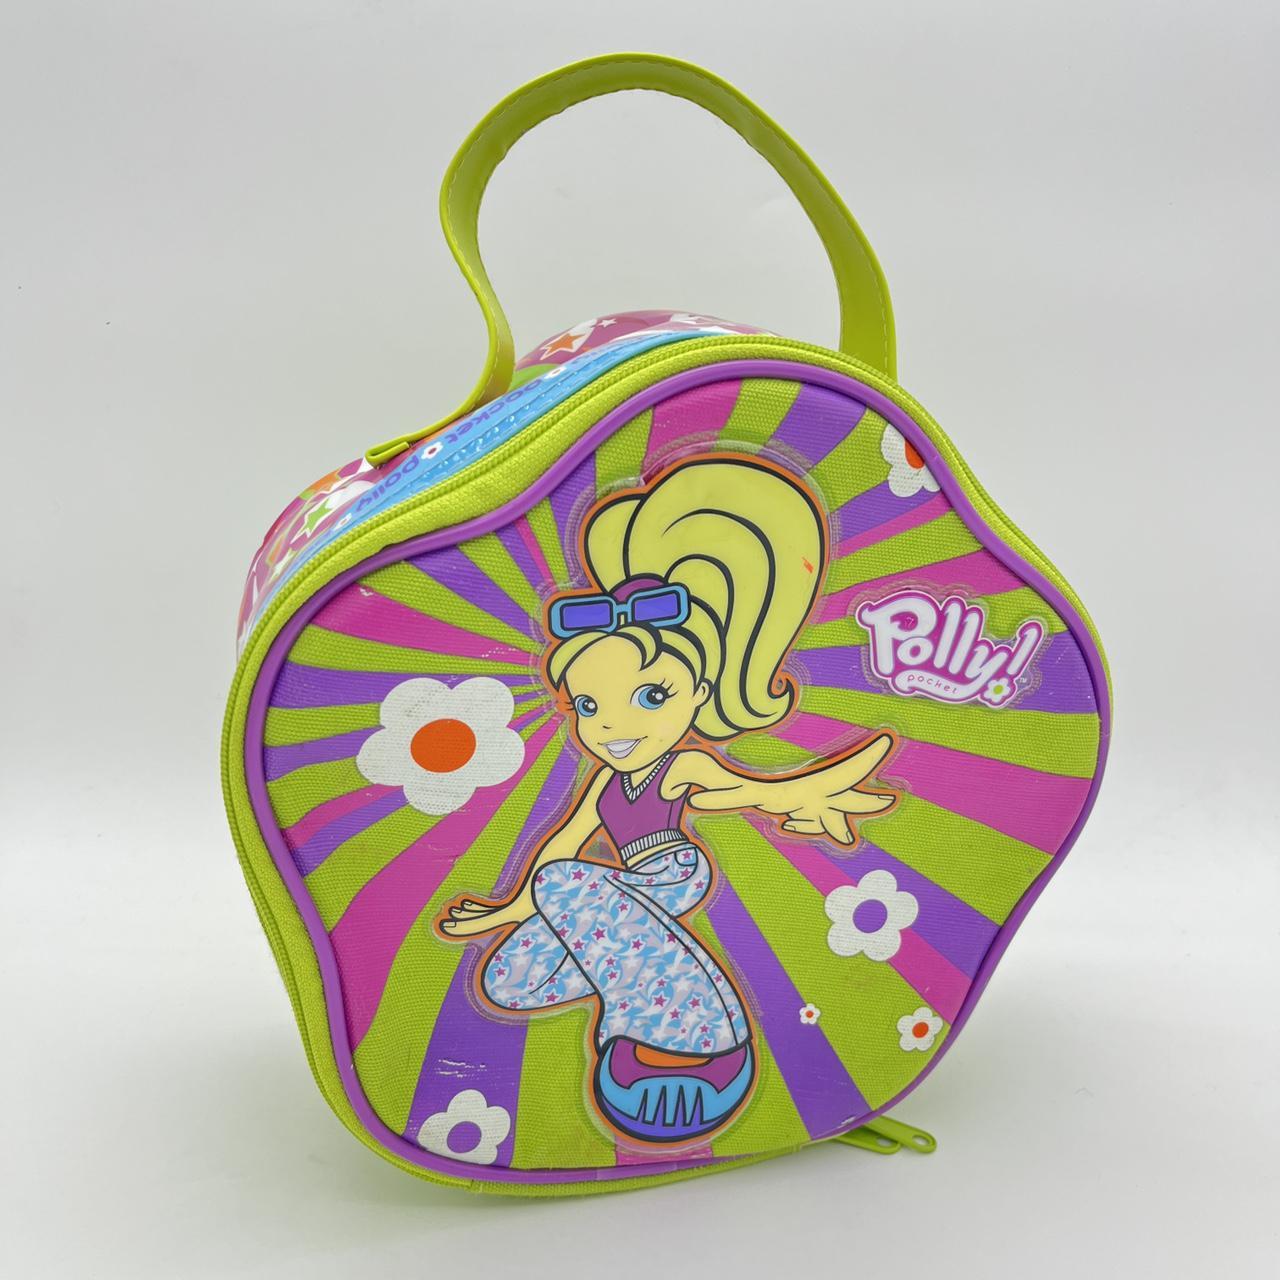 Product Image 1 - Vintage Polly Pocket Purse

•Vintage Polly